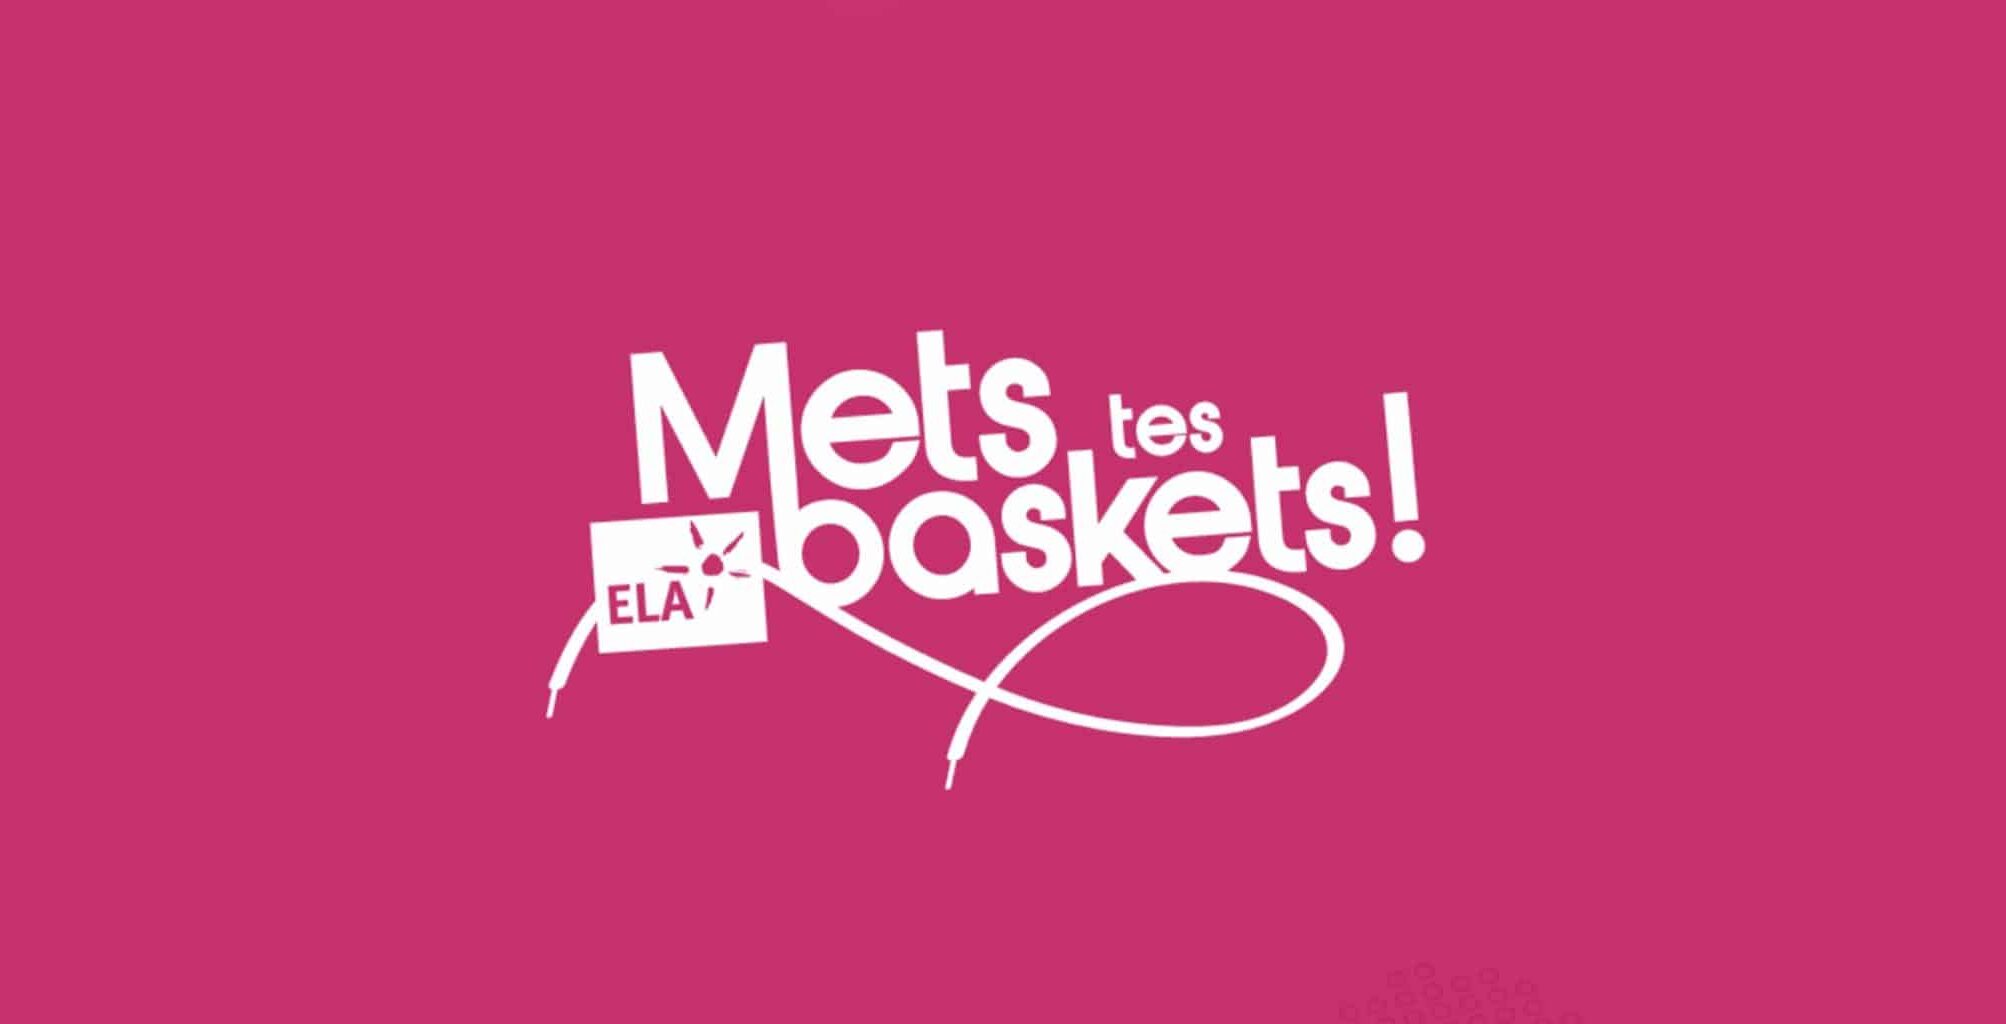 mets-tes-baskets-ela-course-connectee-scaled.jpg